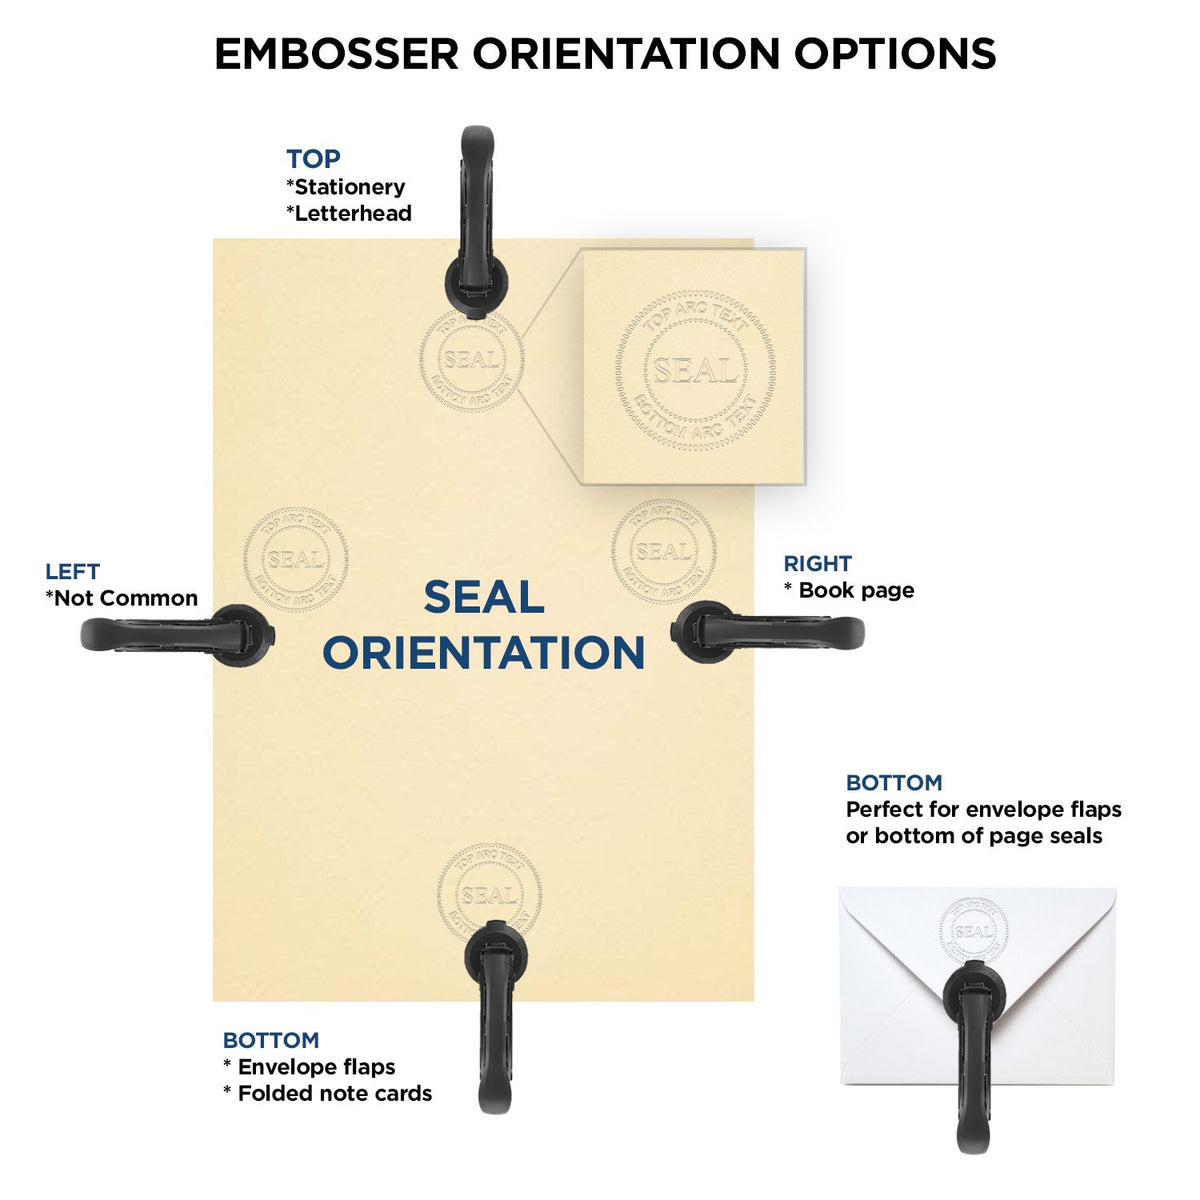 An infographic for the Long Reach Mississippi Land Surveyor Seal showing embosser orientation, this is showing examples of a top, bottom, right and left insert.